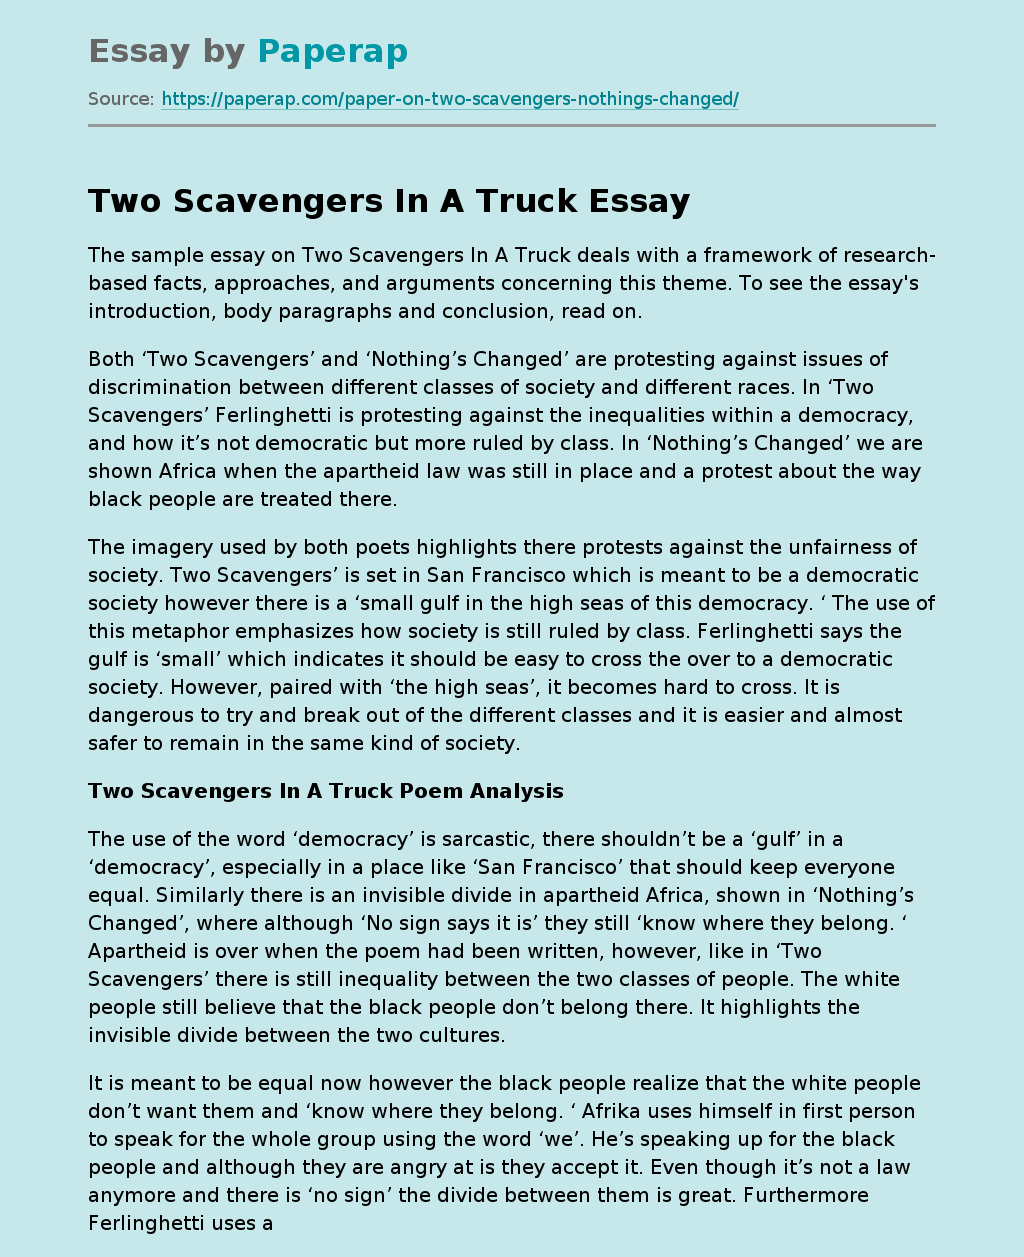 Sample Essay on Two Scavengers in a Truck